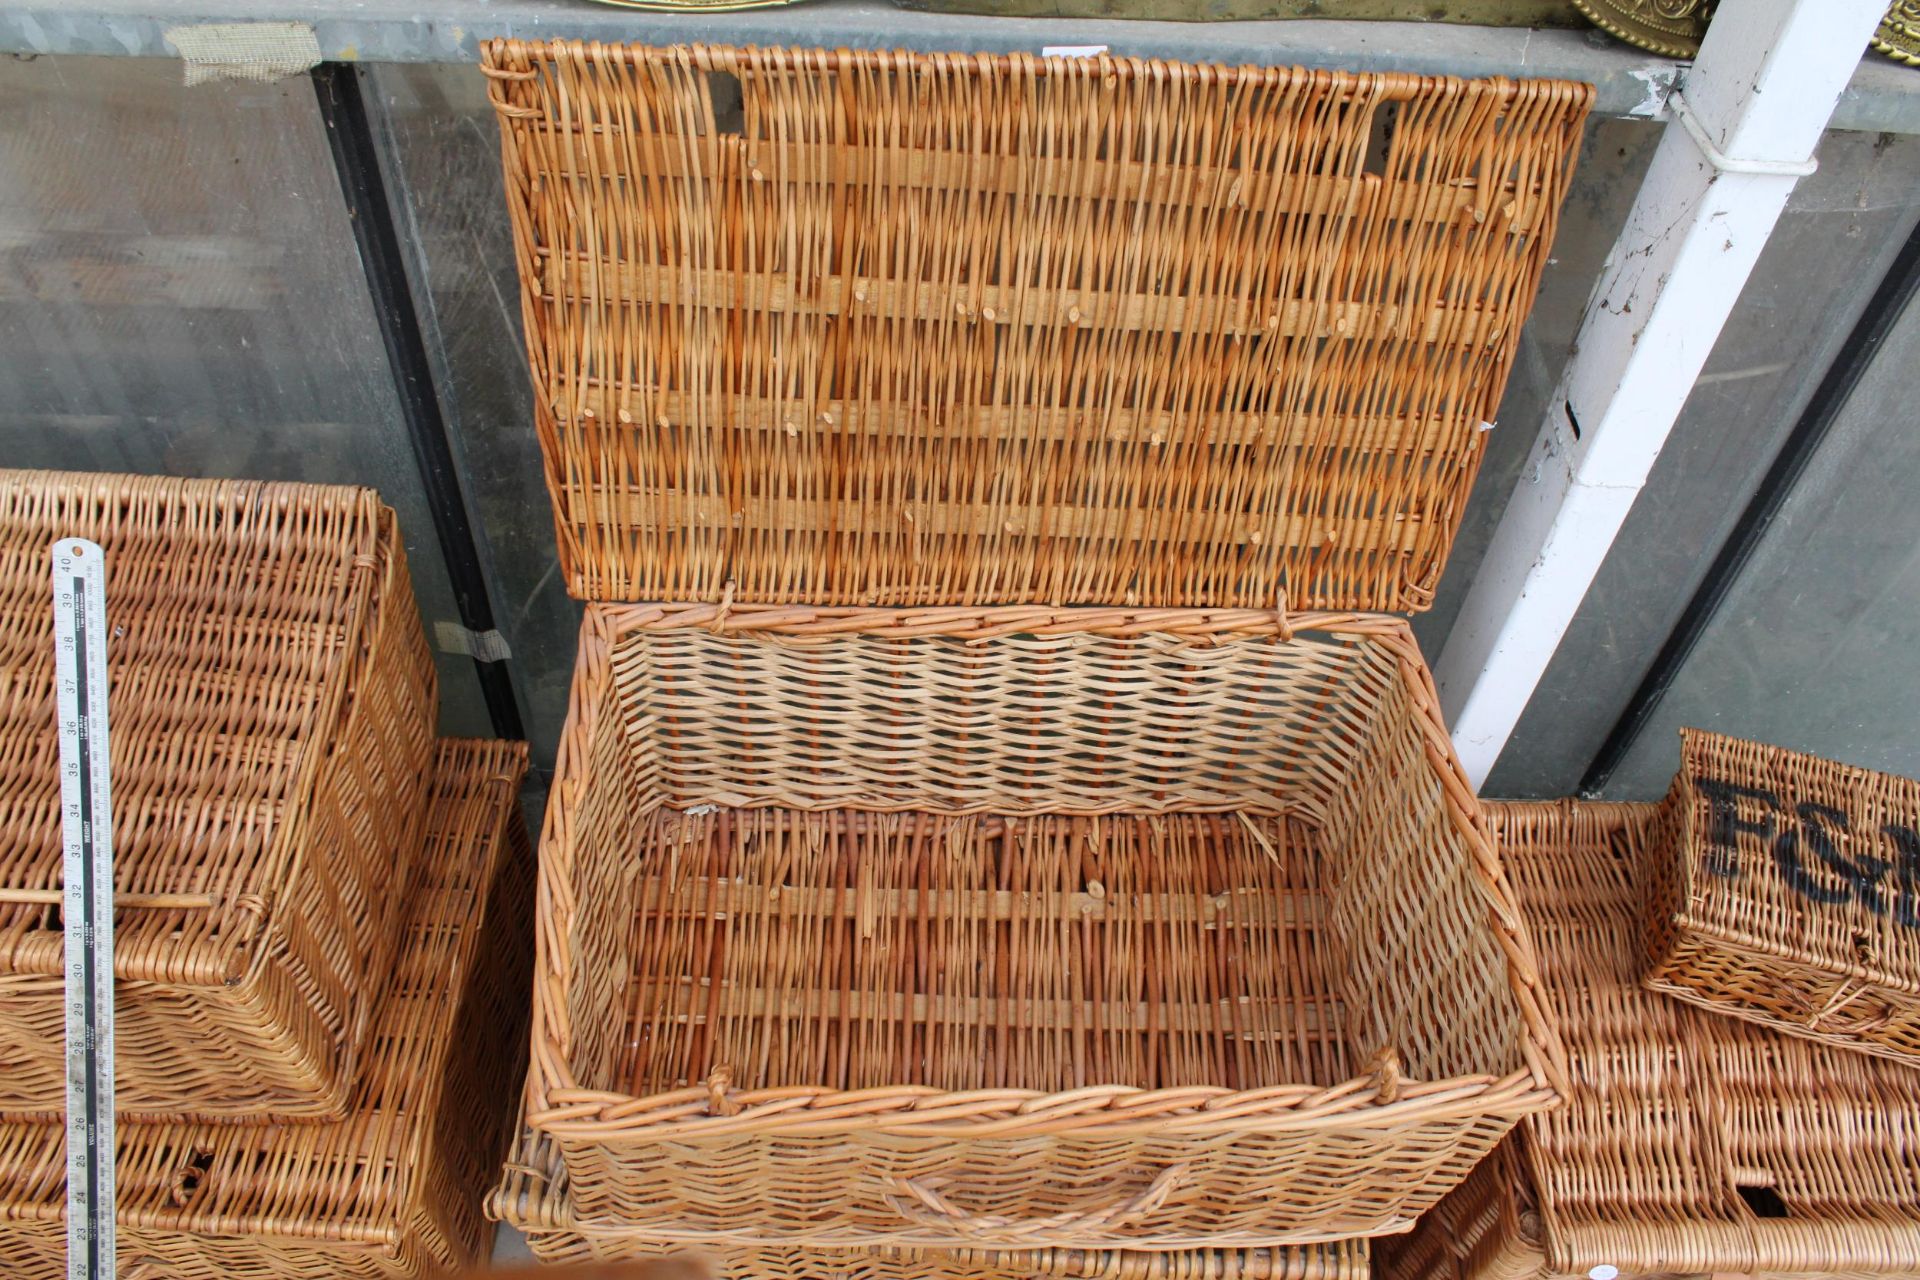 TWO VINTAGE WICKER PICNIC HAMPERS - Image 2 of 2